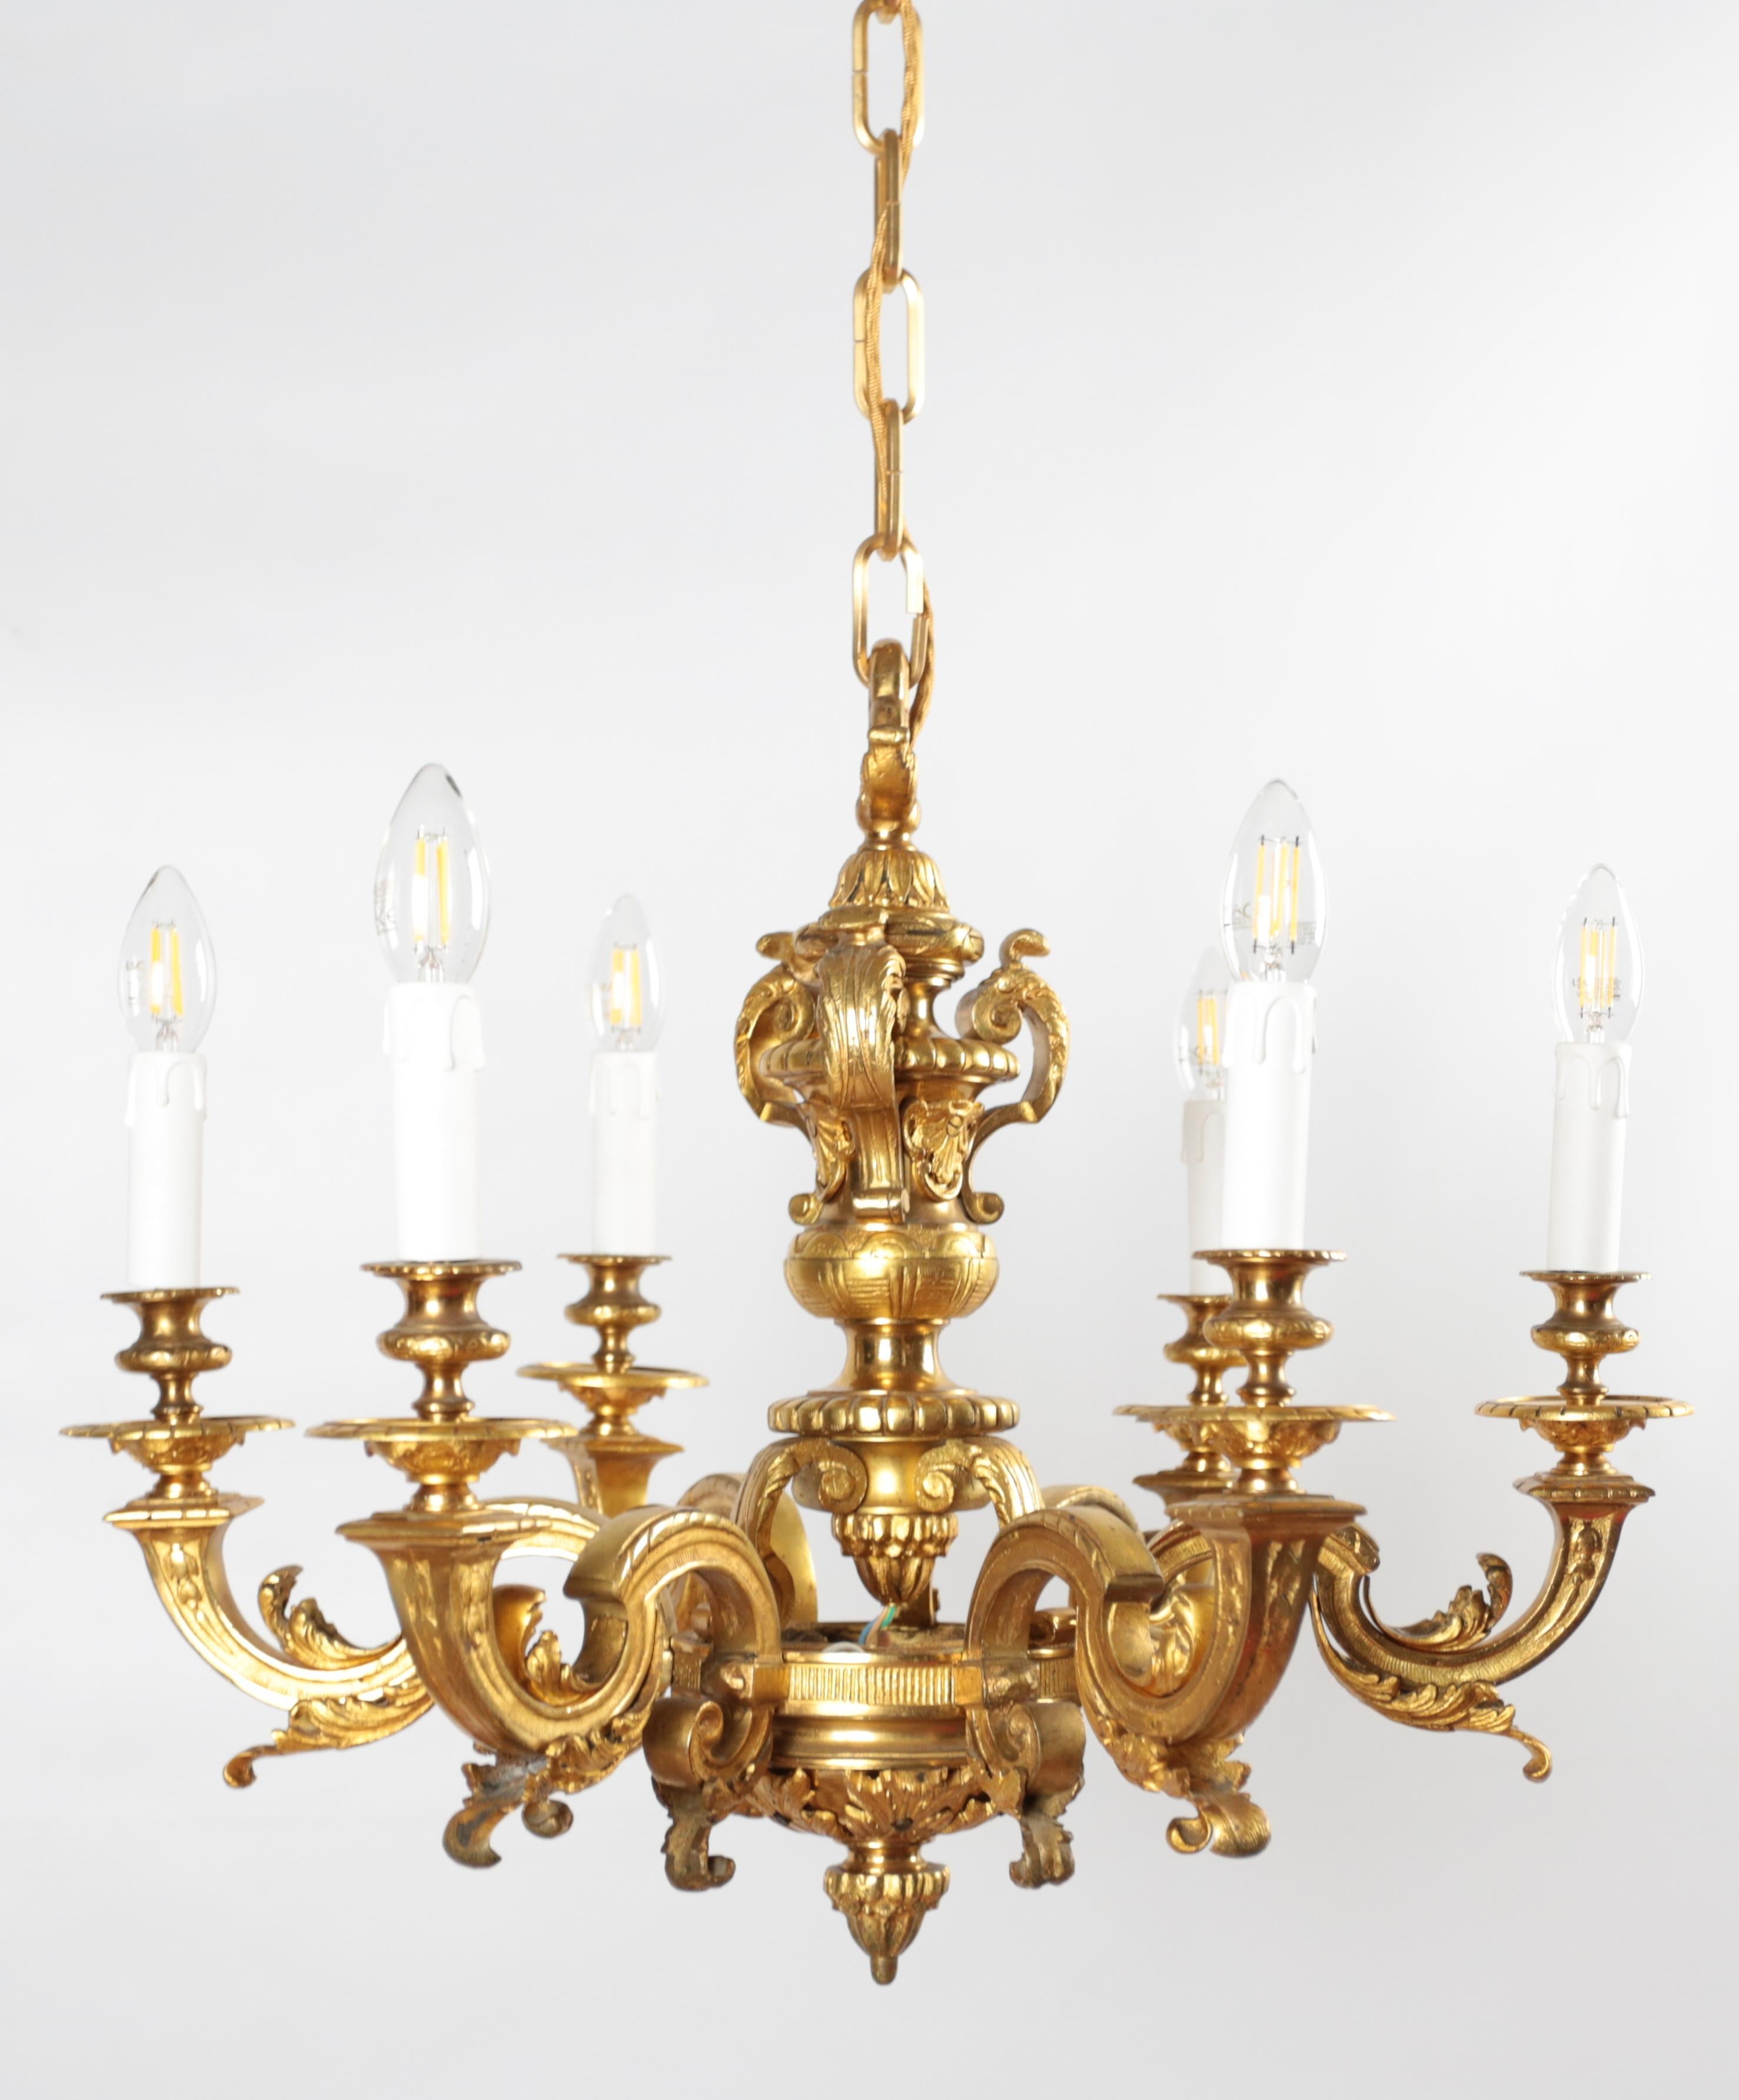 Antique Mazarin gilt bronze chandelier

Six-arm luxury chandelier made of gilded bronze after total restoration - completely new electrical installation: new wiring, new sockets, new sheaths and a new supply cable with fabric braiding in the old